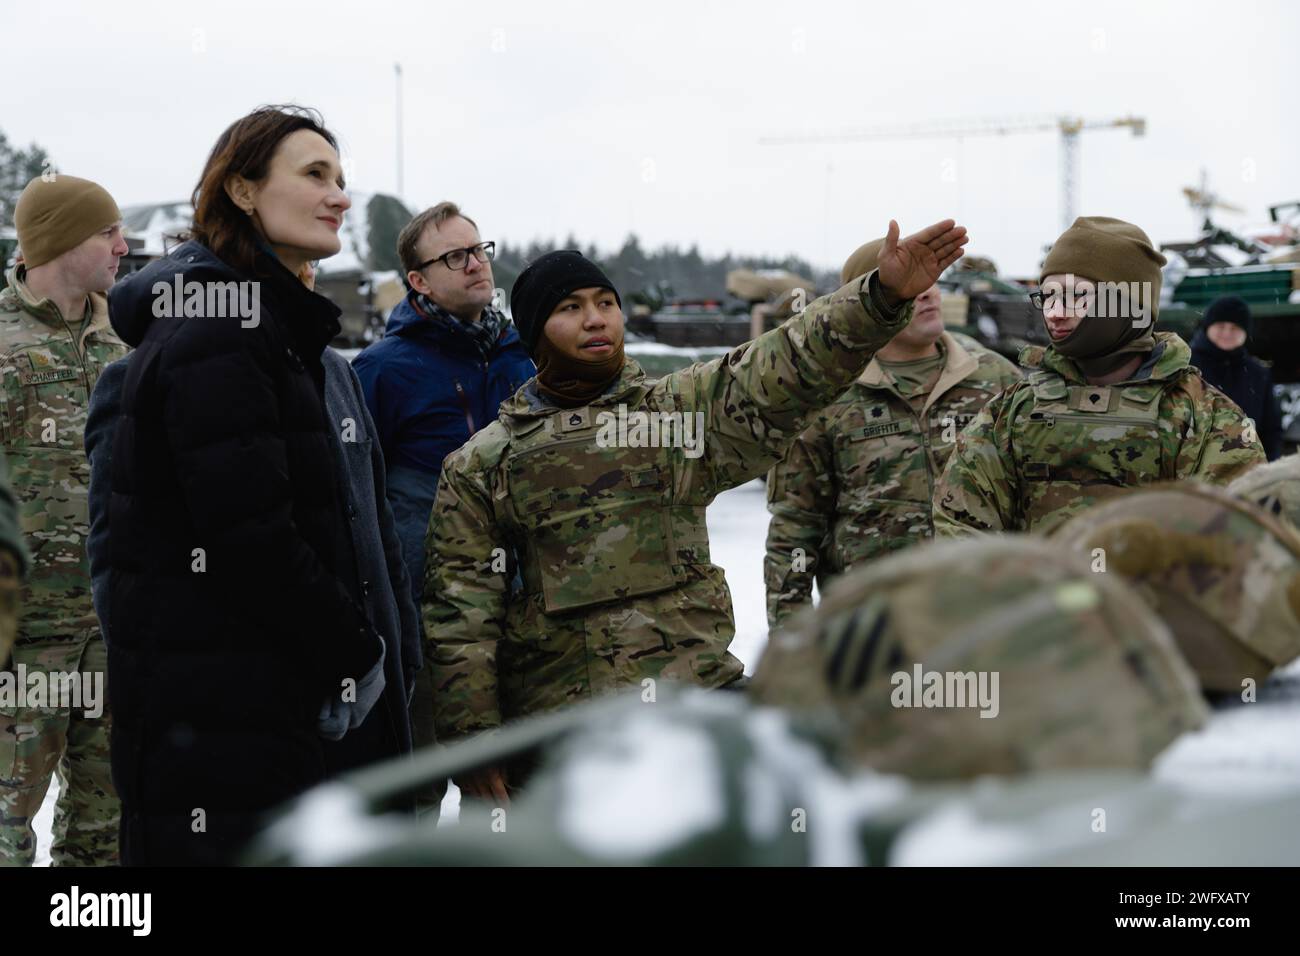 U.S. Army Staff Sgt. Vincent Espinar, a tank commander with 3rd Battalion, 67th Armored Regiment, 2nd Armored Brigade Combat Team, 3rd Infantry Division, shares his knowledge of the M1A2 Abrams tank with Lithuanian Speaker of Parliament Viktorija Čmilytė-Nielsen during a tour of Camp Herkus, Lithuania, Jan. 4, 2024. The 3rd Infantry Division’s mission in Europe is to engage in multinational training and exercises across the continent, working alongside NATO Allies and regional security partners to provide combat-credible forces to V Corps, America’s forward deployed corps in Europe. Stock Photo